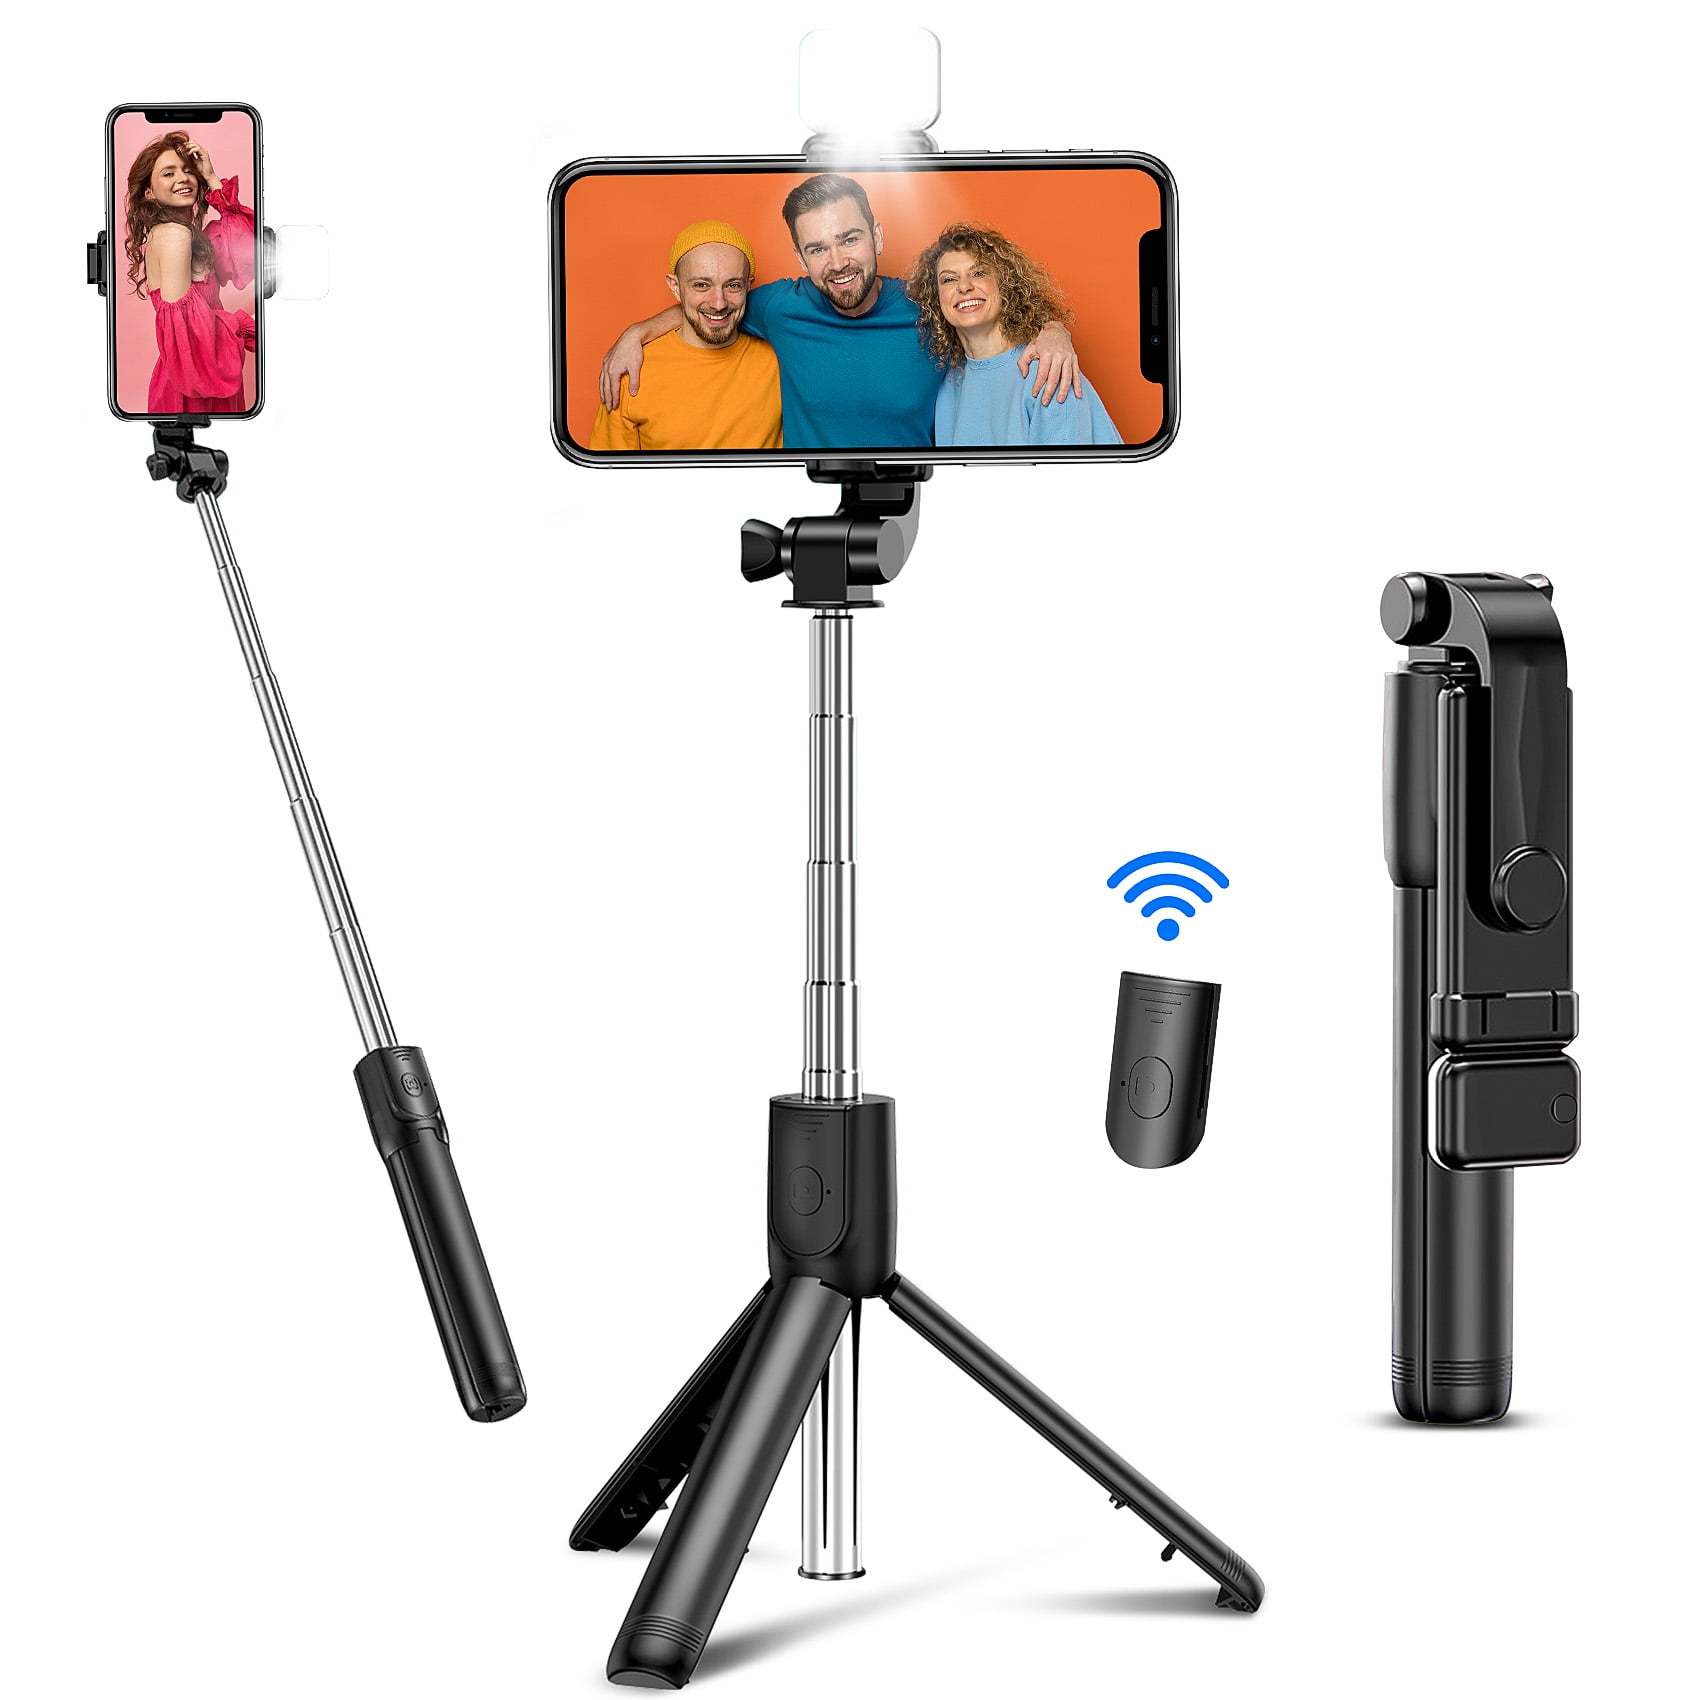 Galaxy S10/S9/S9 Plus Selfie Stick Tripod More CAFELE All in One Extendable Tripod Stand with Detachable Bluetooth Remote,Lightweight Aluminum Tripod for iPhone 11/XS MAX/X/8/8 Plus 